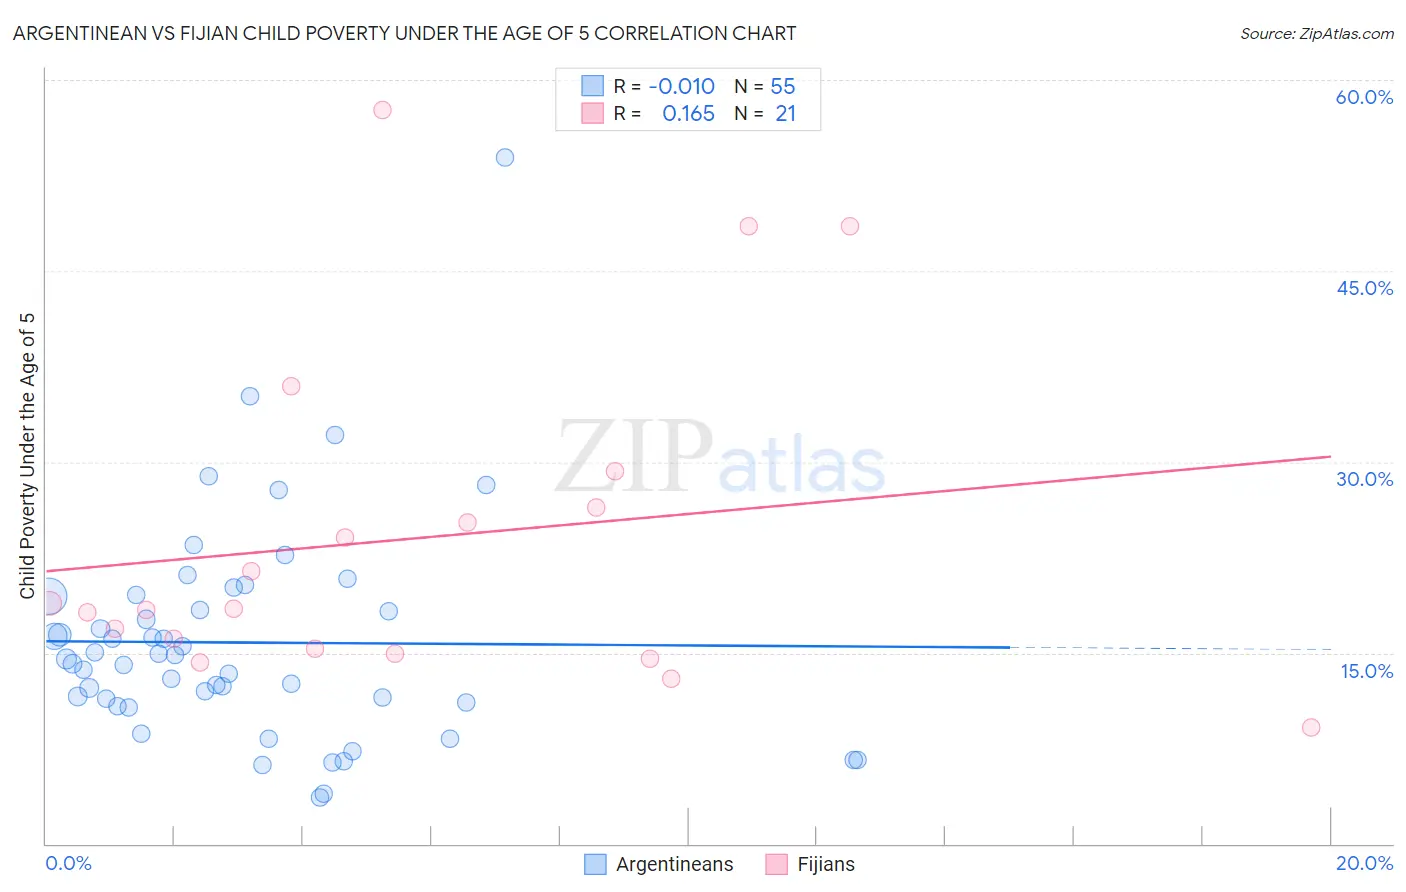 Argentinean vs Fijian Child Poverty Under the Age of 5